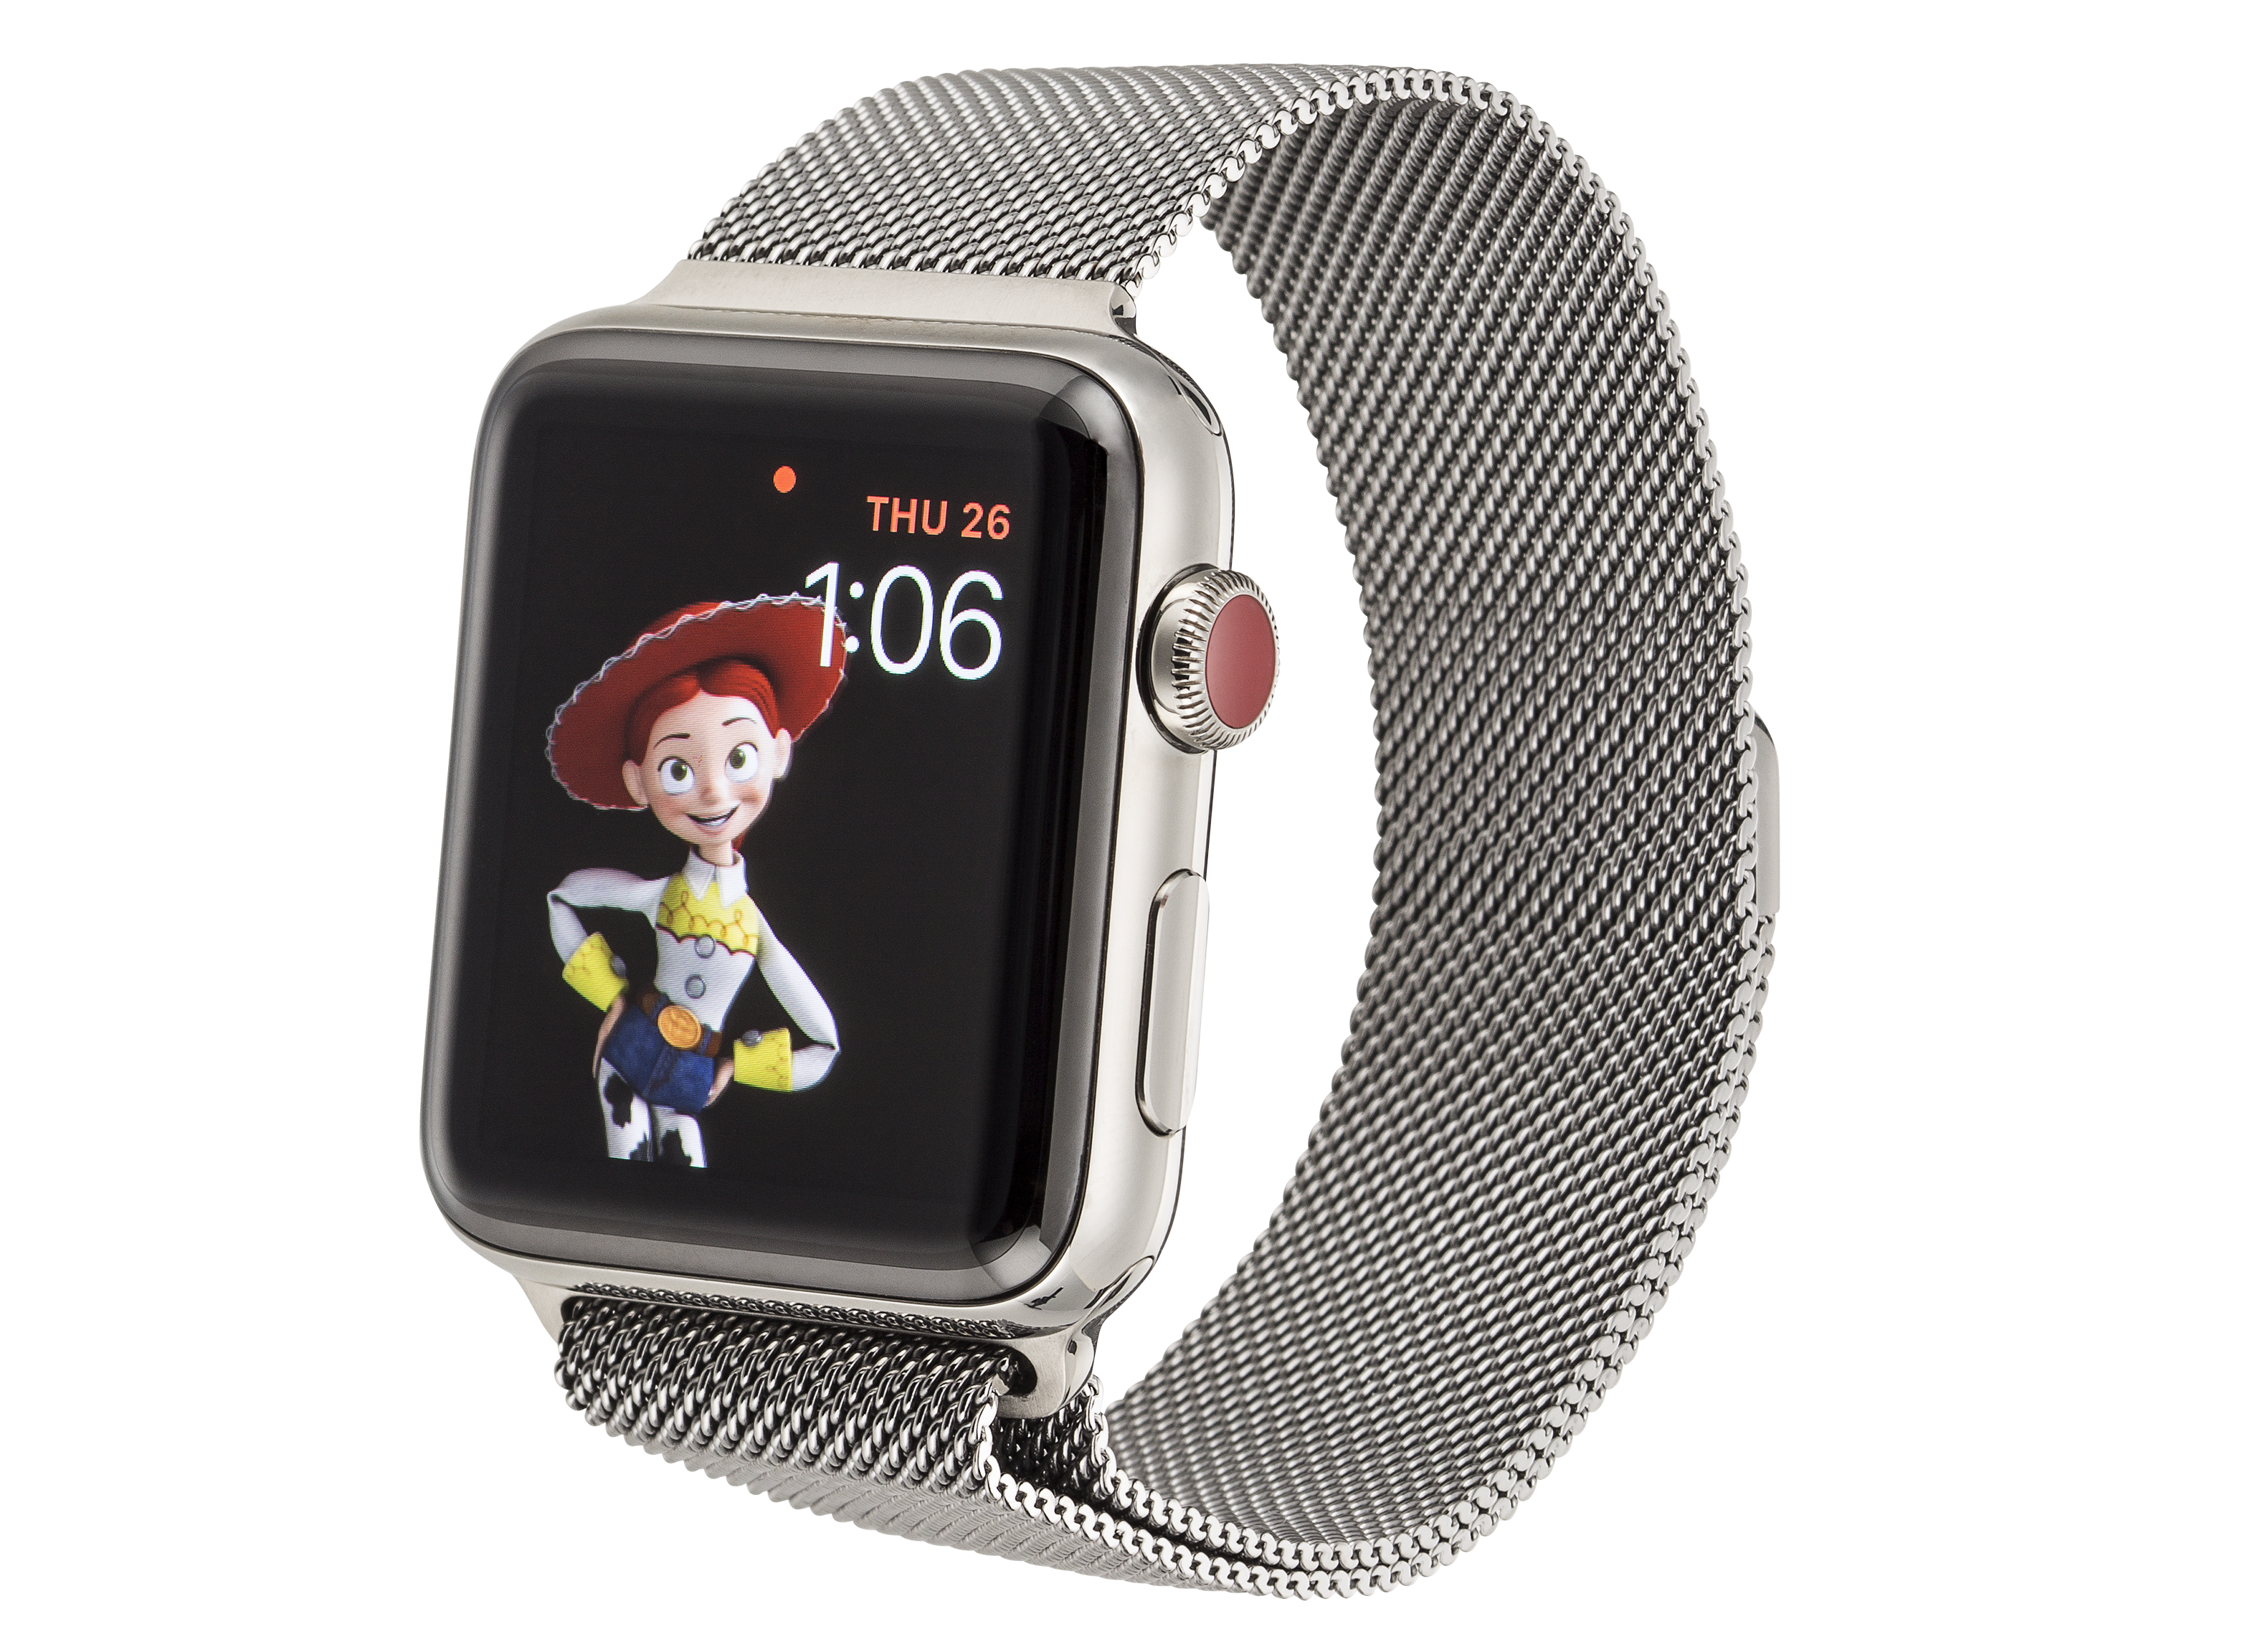 Apple Watch Series 3 (42mm) Stainless Steel case GPS + Cellular Smartwatch  - Consumer Reports